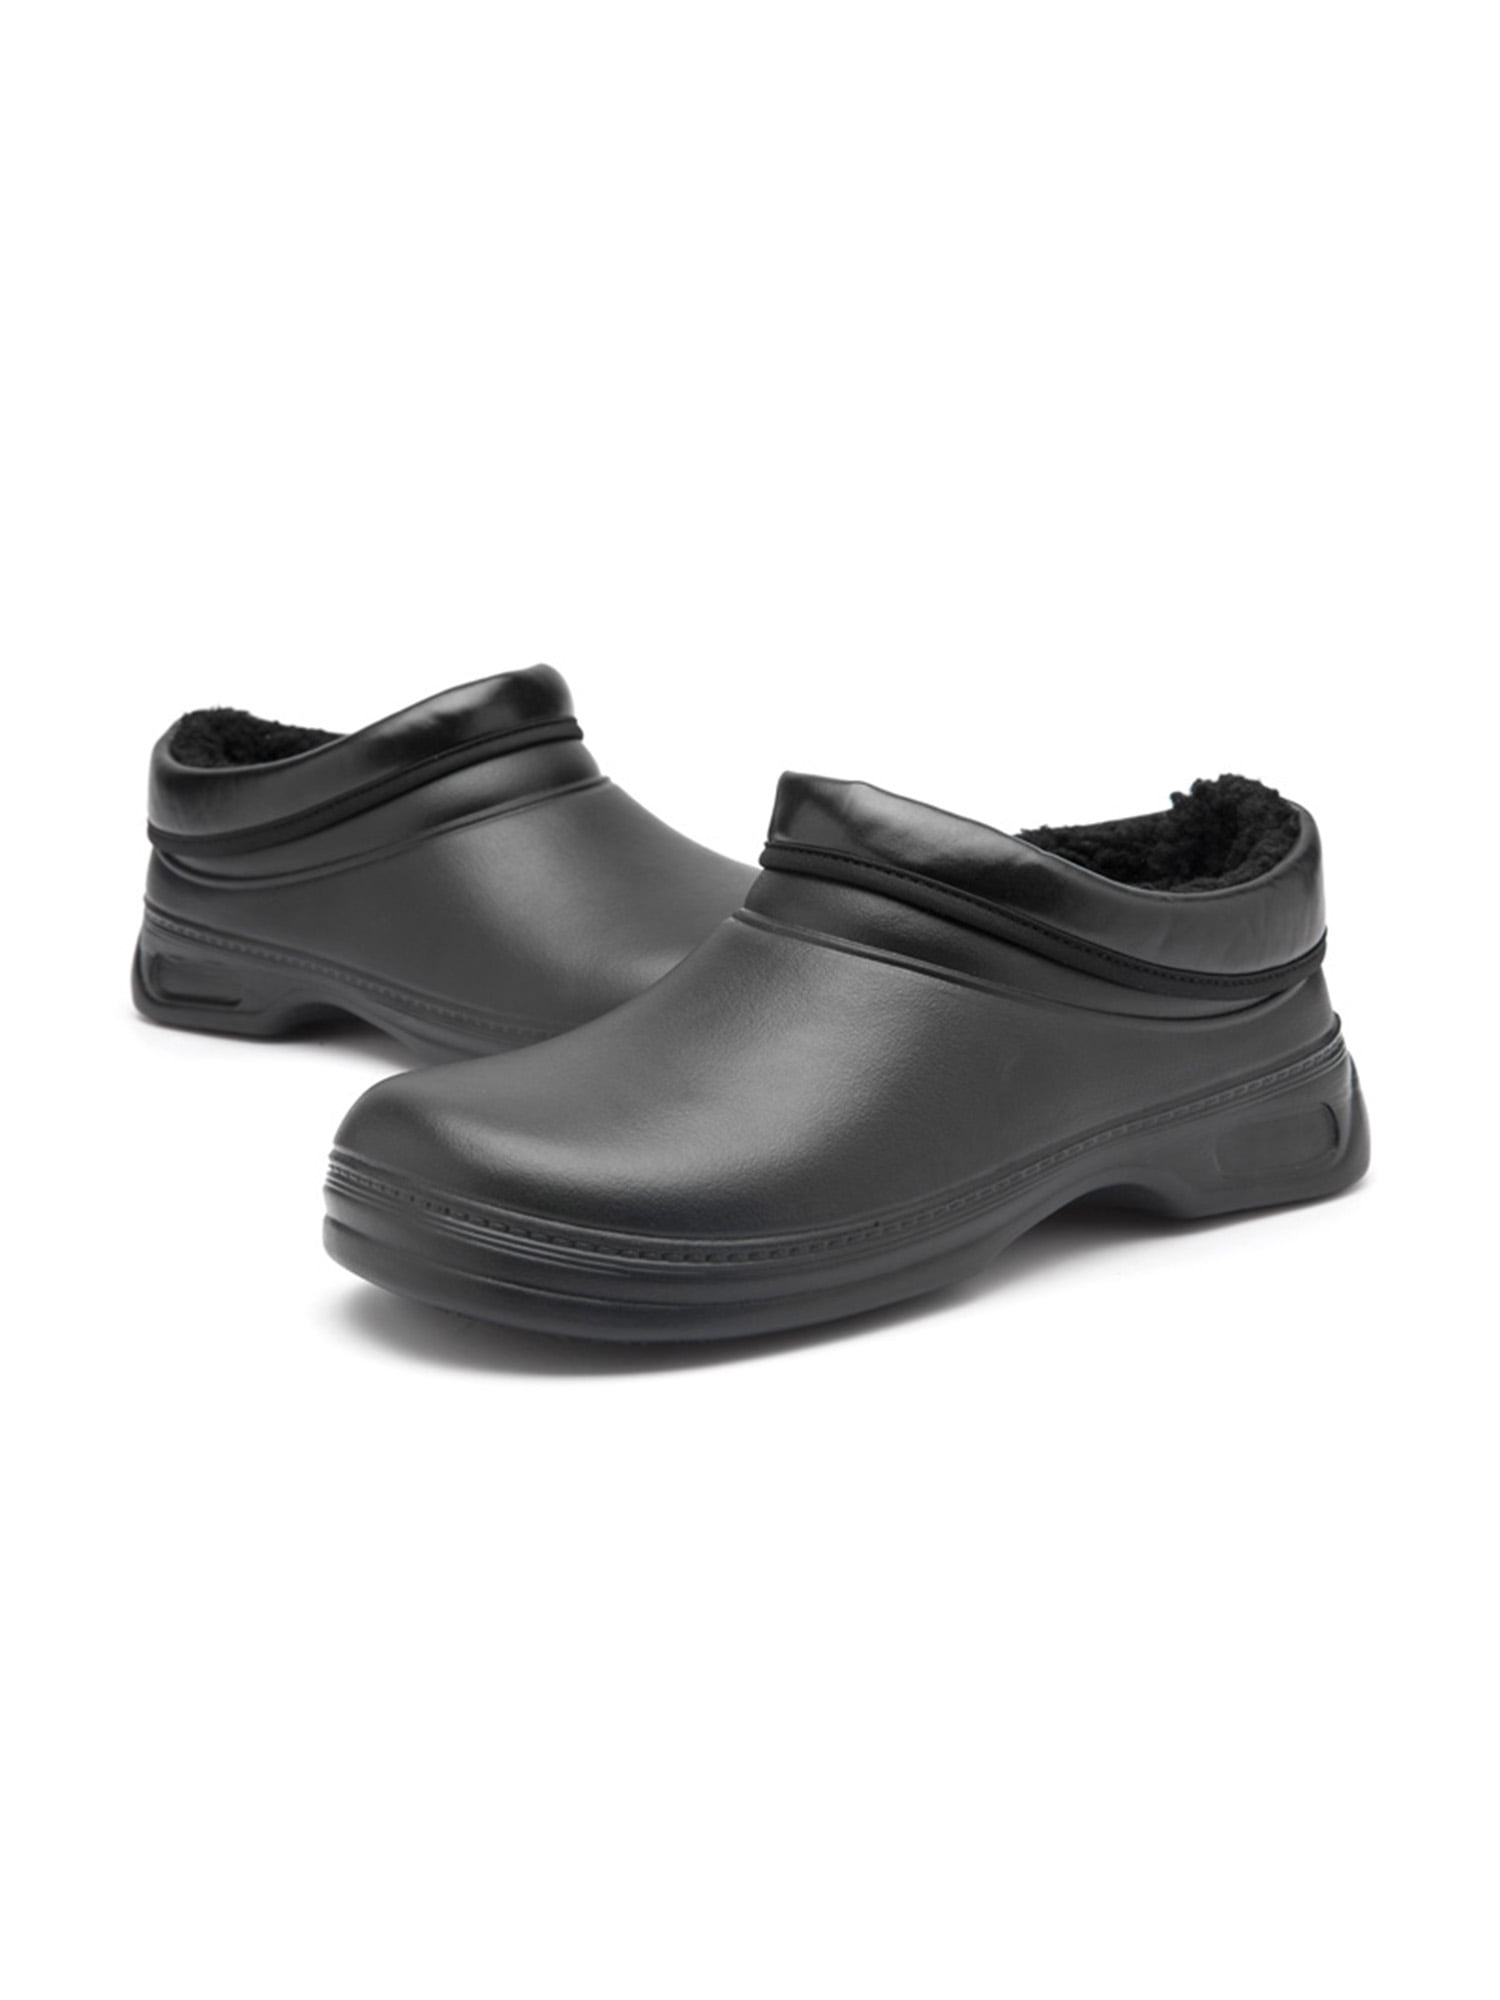 Womens Chef Garden All Weather Comfort Nursing Clogs Shoes Black All Sizes 